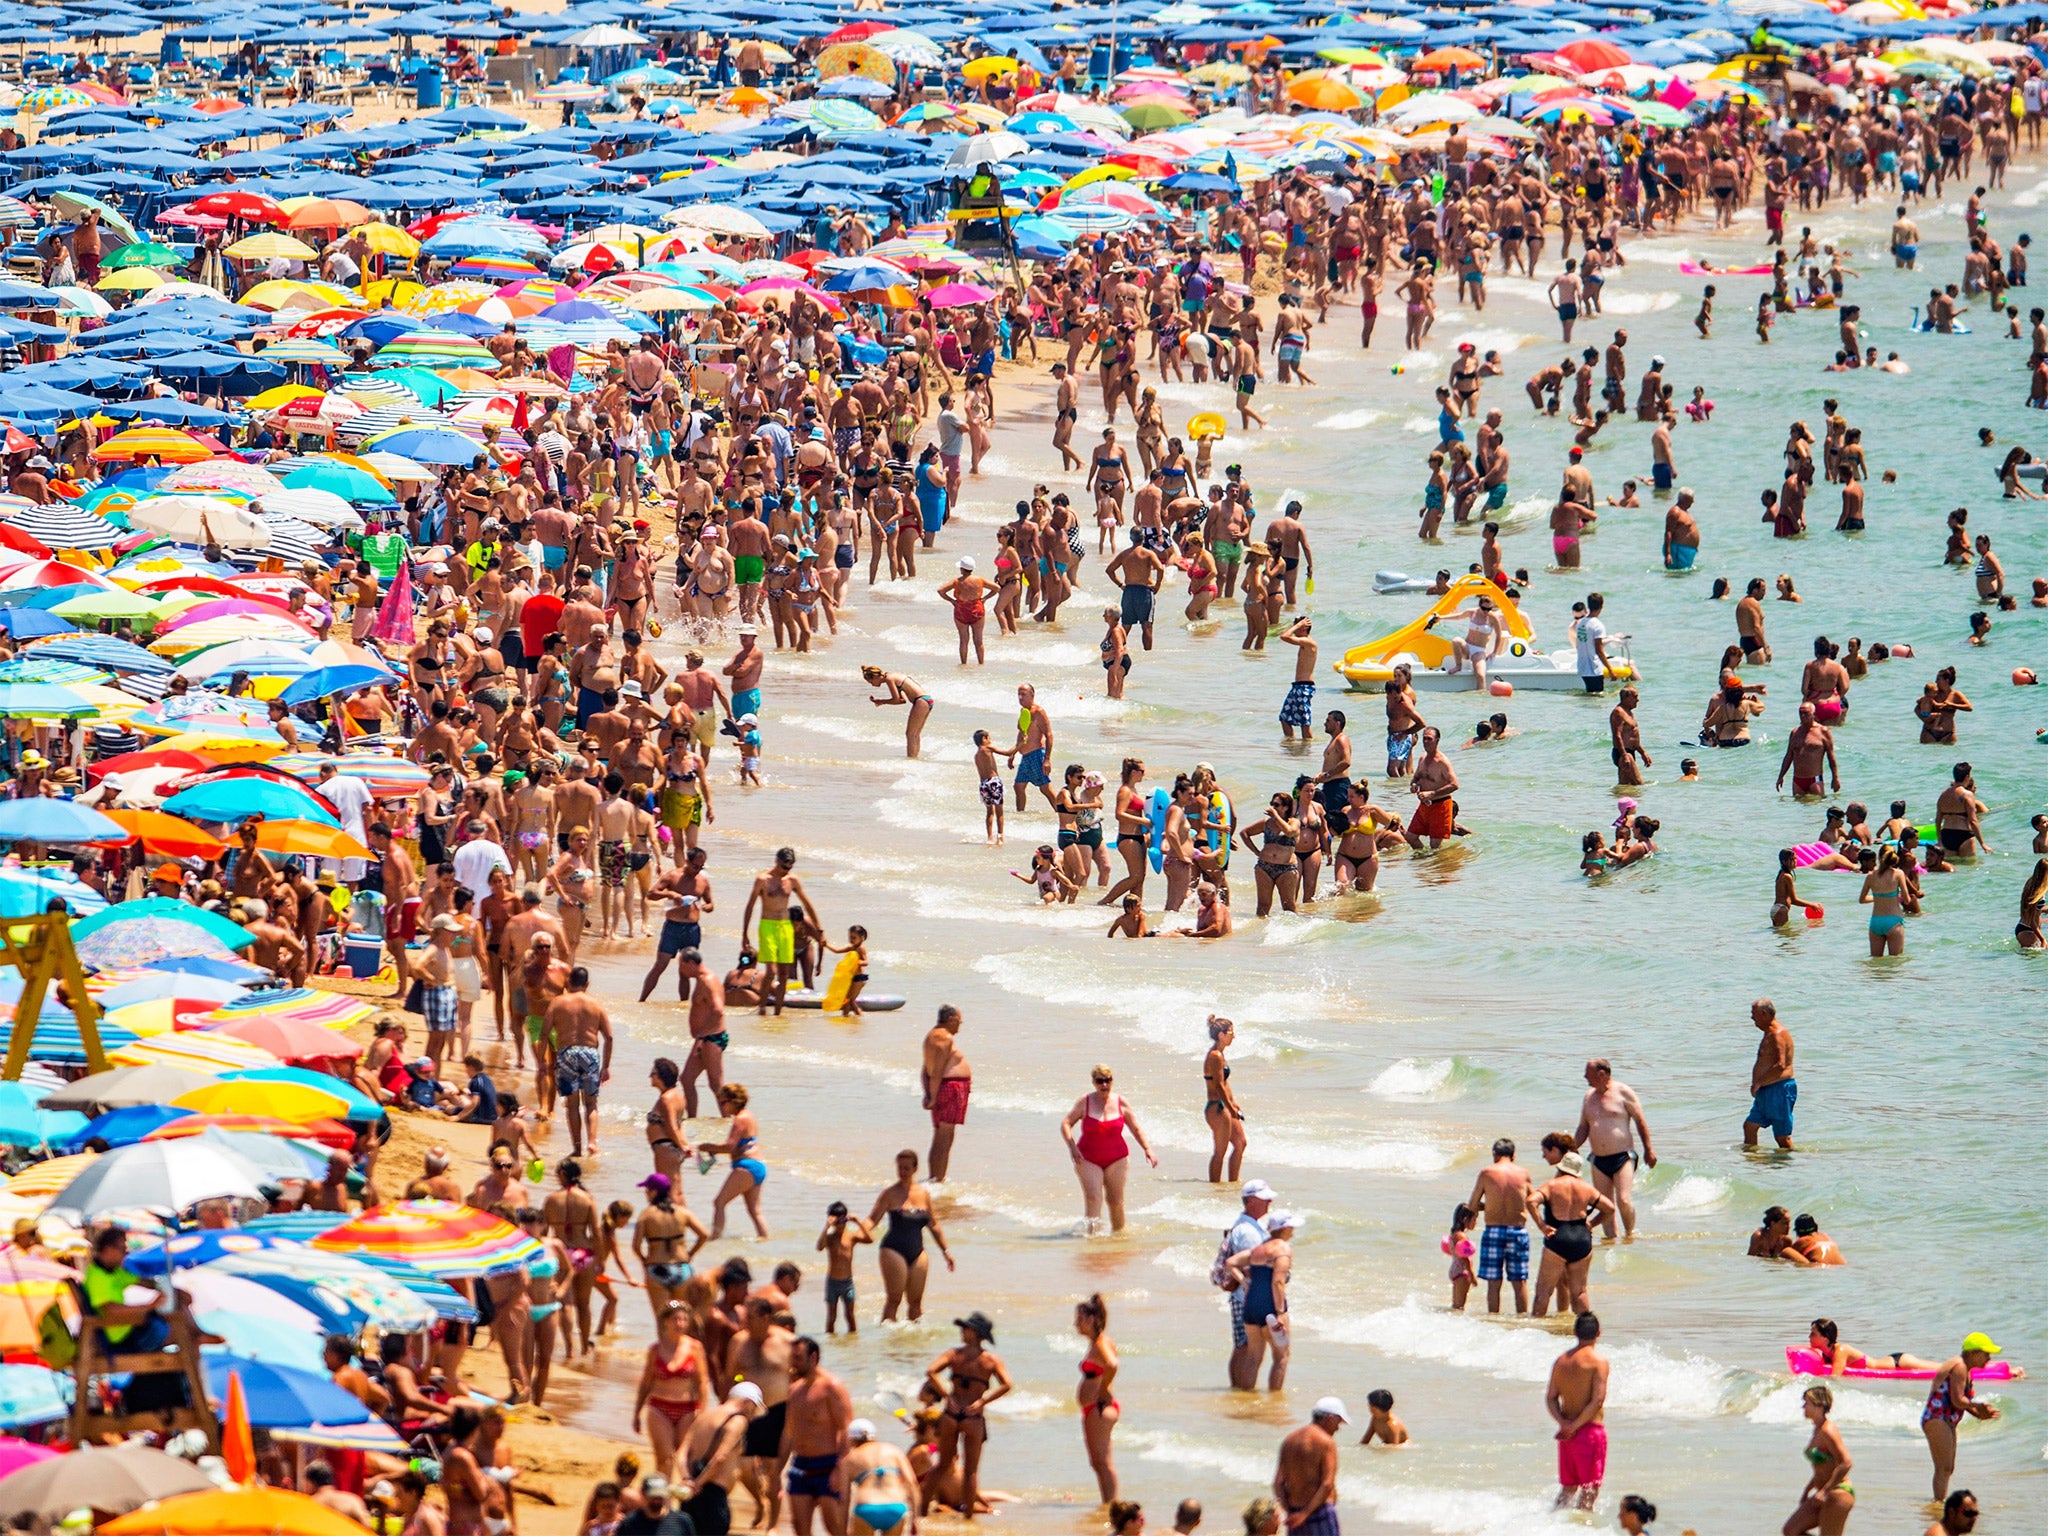 Holidaymakers in Benidorm, on Spain's Costa Blanca